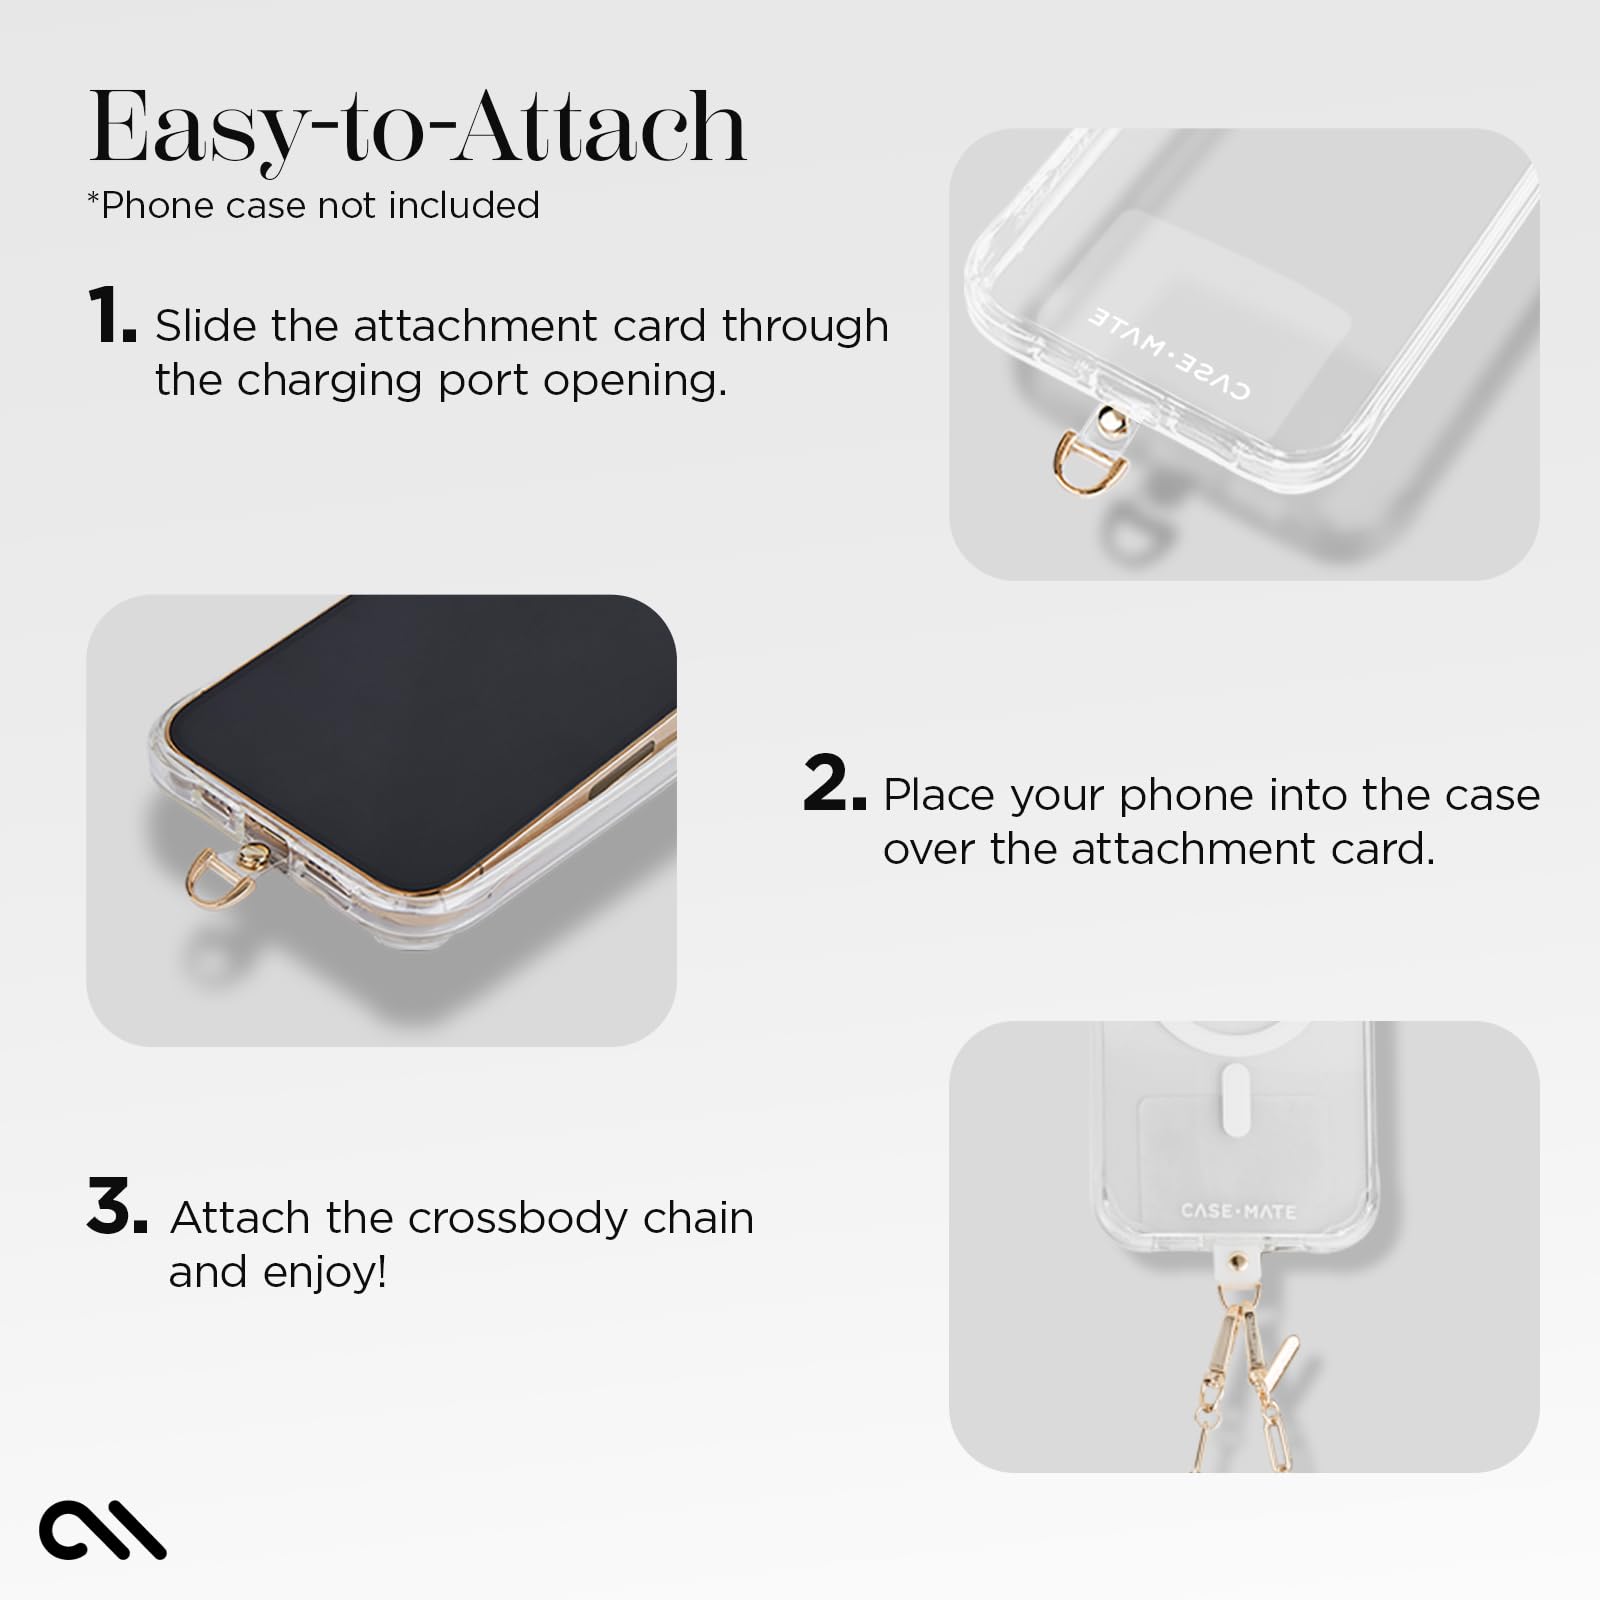 Case-Mate Crossbody Phone Lanyard/Chain [Works with All Phones] Hands-Free Cell Phone Strap - Phone Charm - Neck Chain Holder for iPhone 14 Pro Max/ 13 Pro Max/ 12 Pro Max/ 11/ S23 - Gold